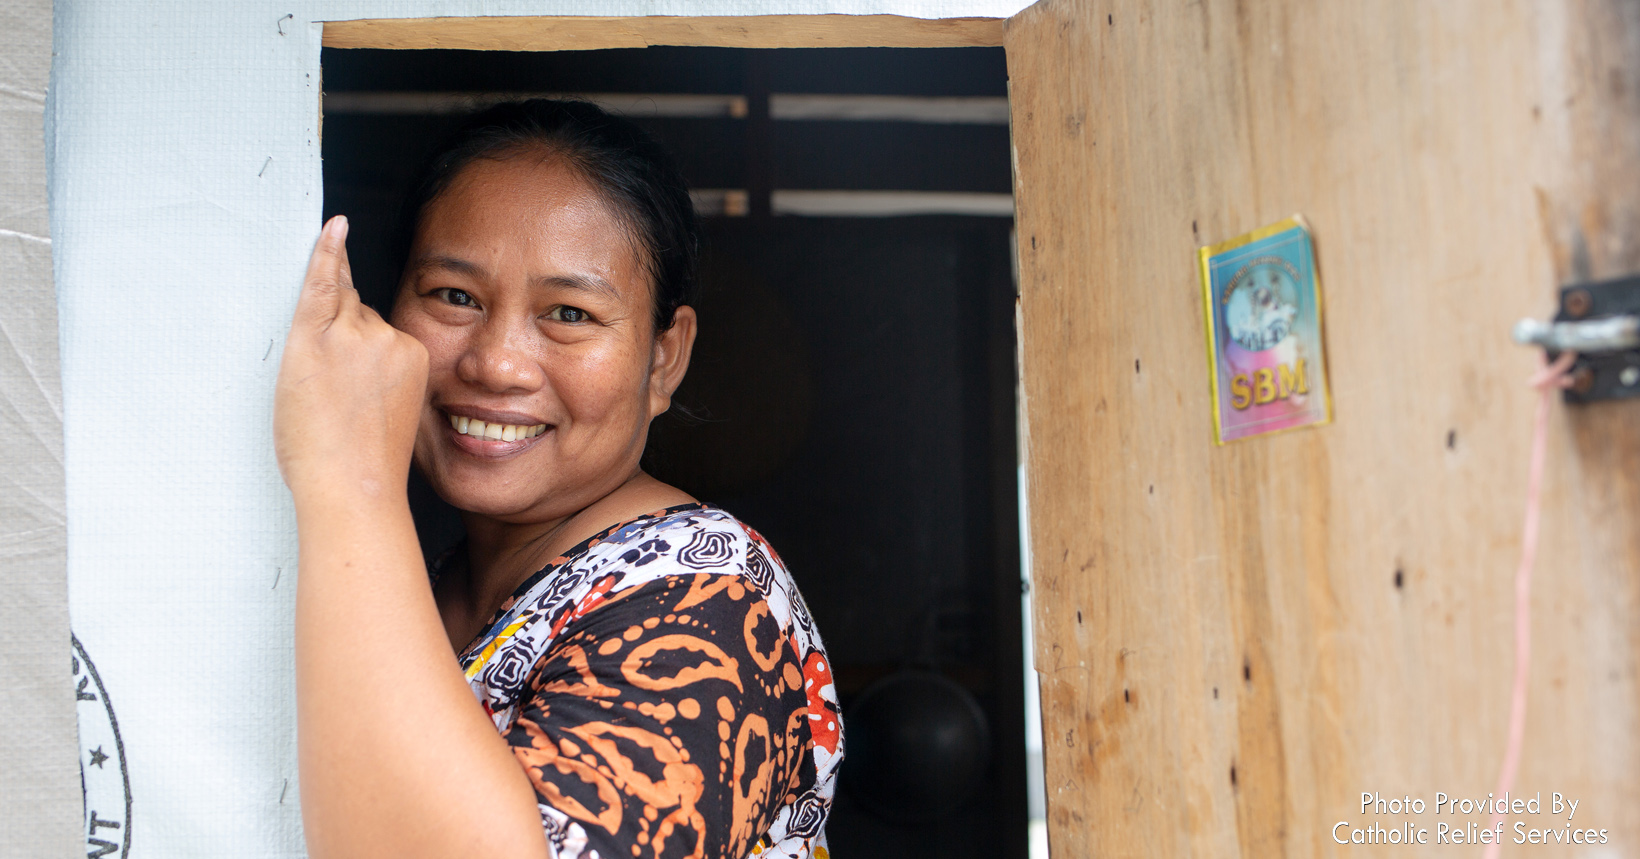 Nirma received multiple cash grants after a 7.5 magnitude earthquake shook central Sulawesi in Indonesia. She put the grants towards her family needs and for a future home.